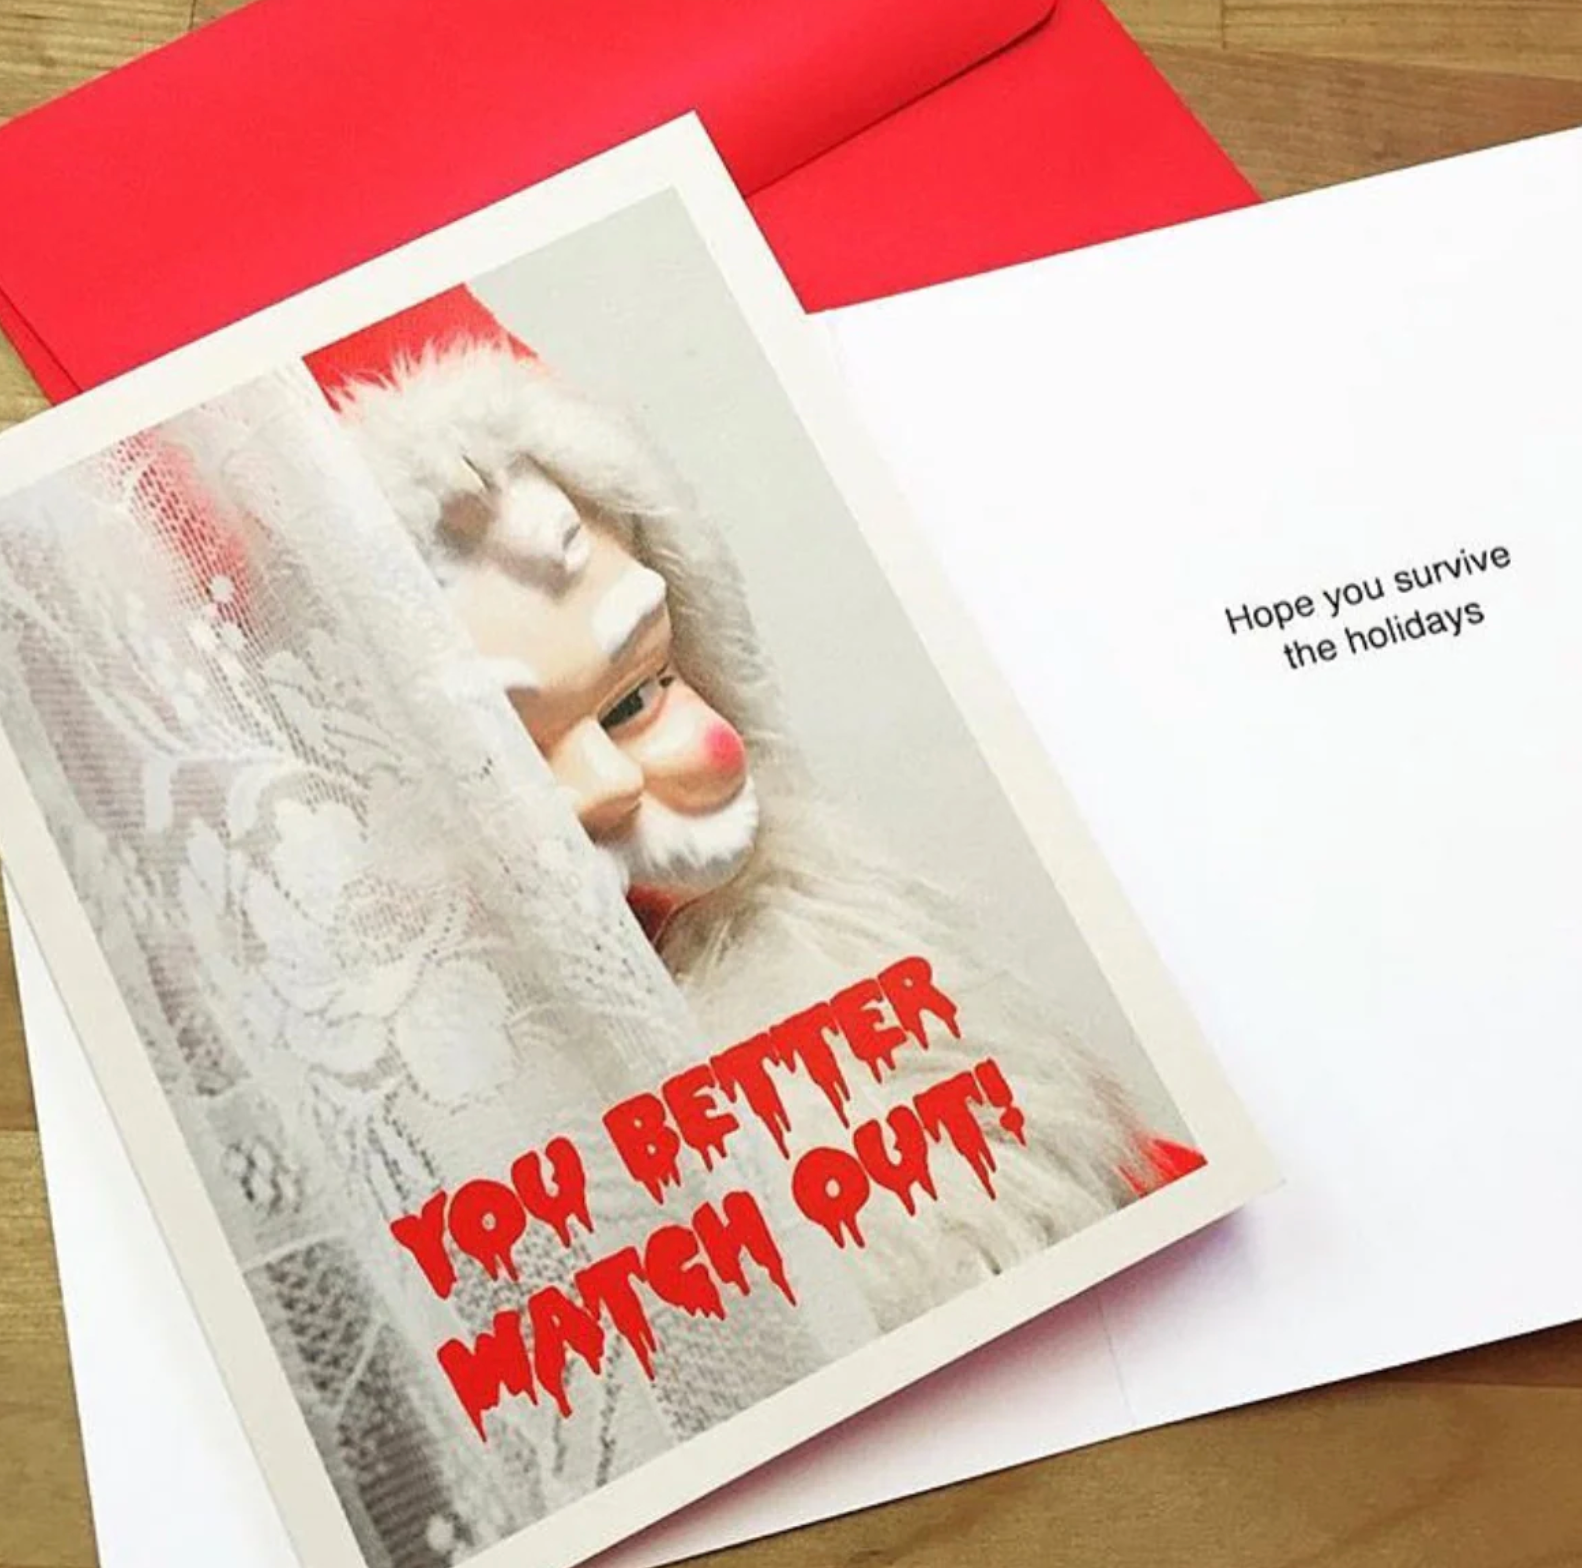 Boxed Cards - You Better Watch Out Creepy Santa